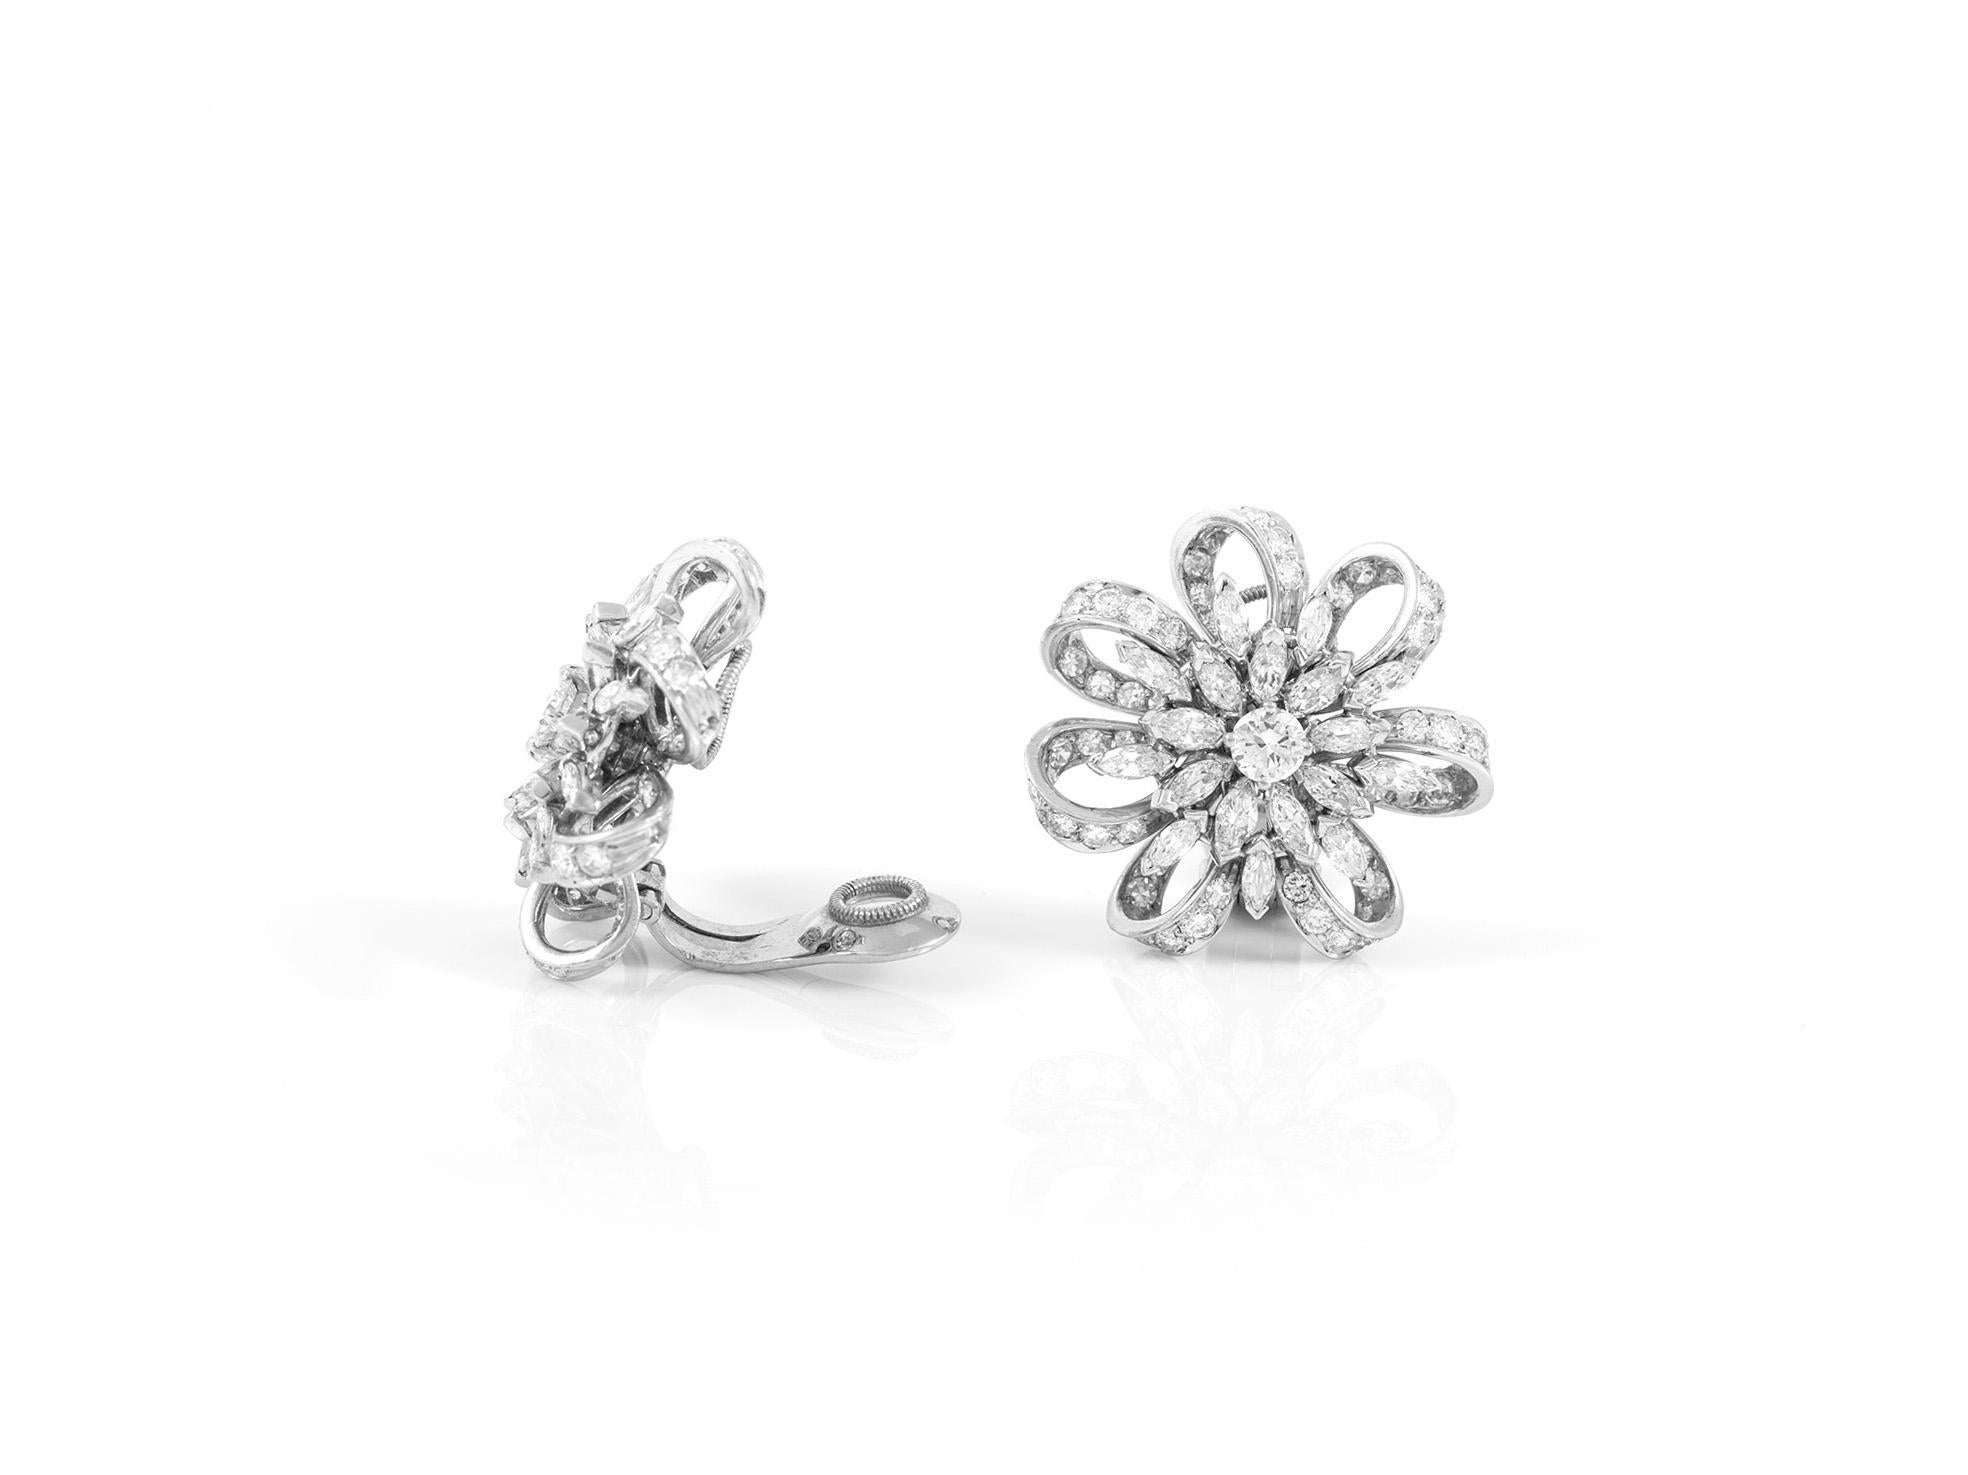 Flower diamond ear-clip earrings, finely crafted in platinum with marquise and round brilliant cut diamonds, weighing a total of approximately 9.00 carat.